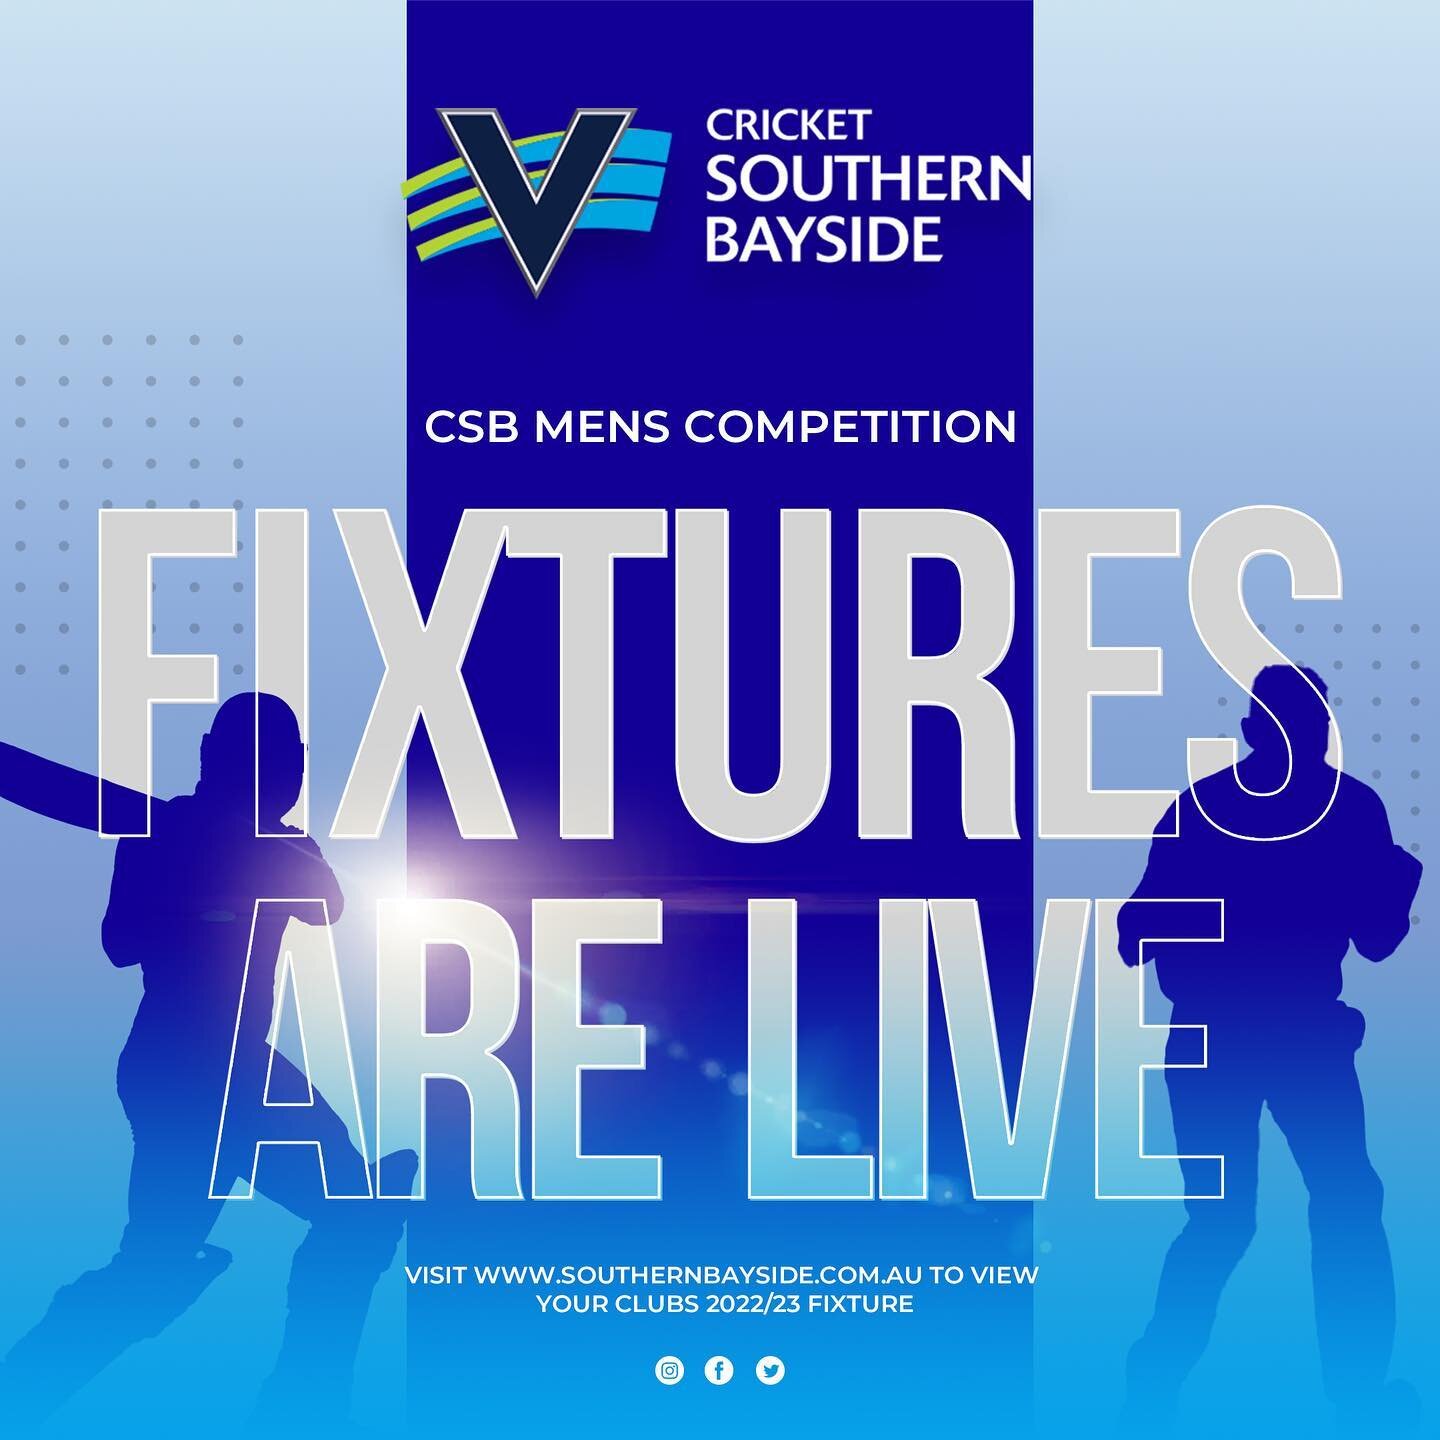 CSB Mens Fixtures are now live! 

Head to our website www.southernbayside.com.au or straight to mycricket to view your clubs fixtures for the 2022/23 season! 

Fixtures are available for Championship to Division 8.